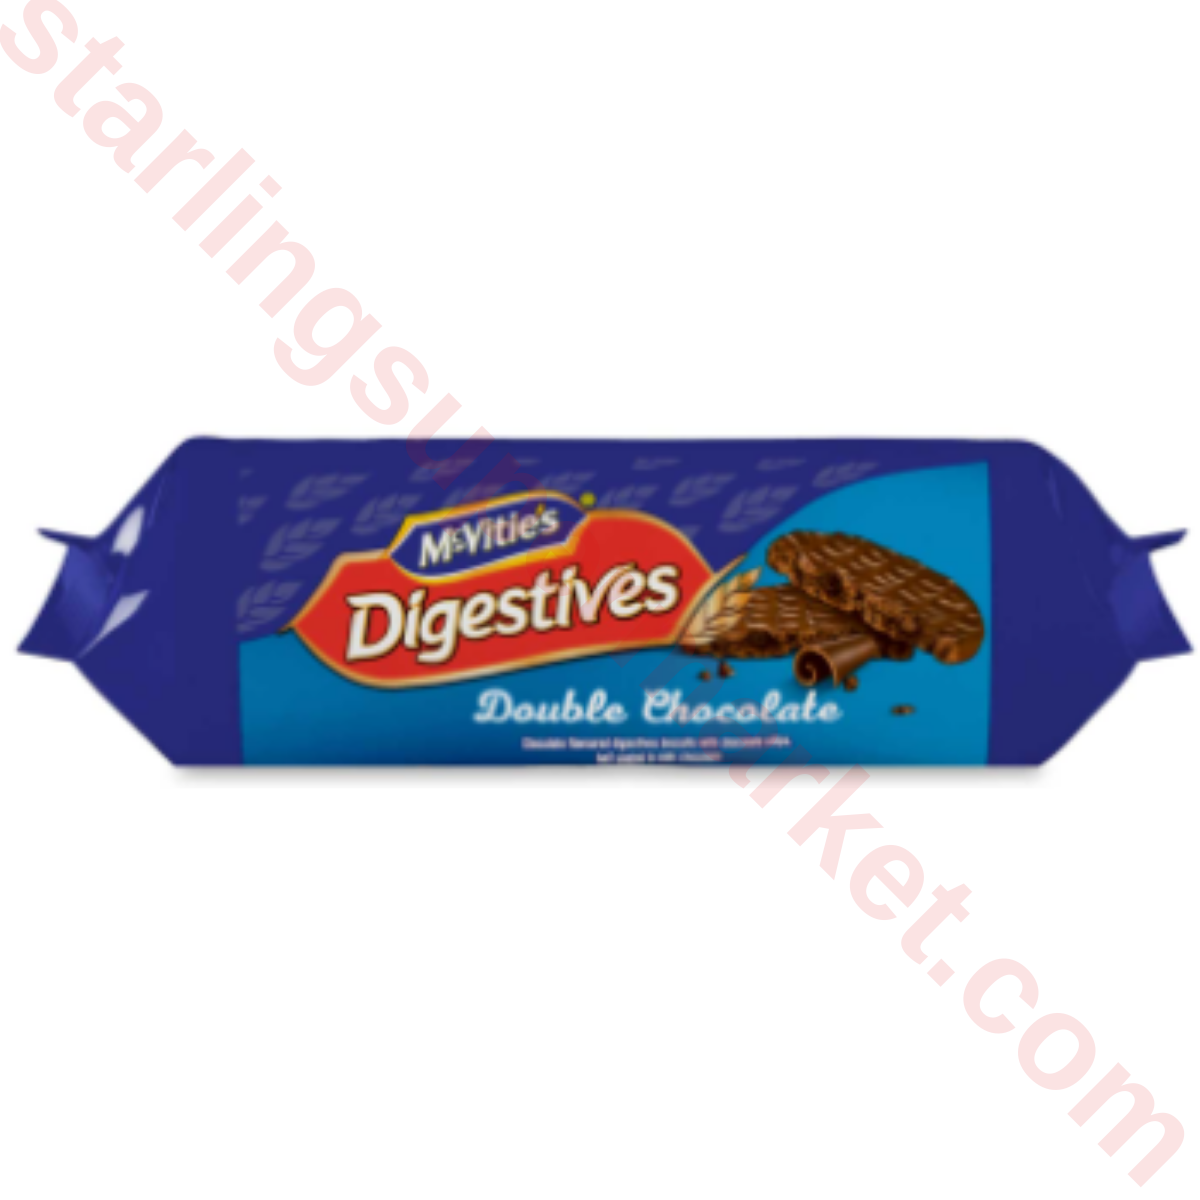 MCVITIES BISCUIT DIGESTIVES DOUBLE CHOCOLATE 250 G